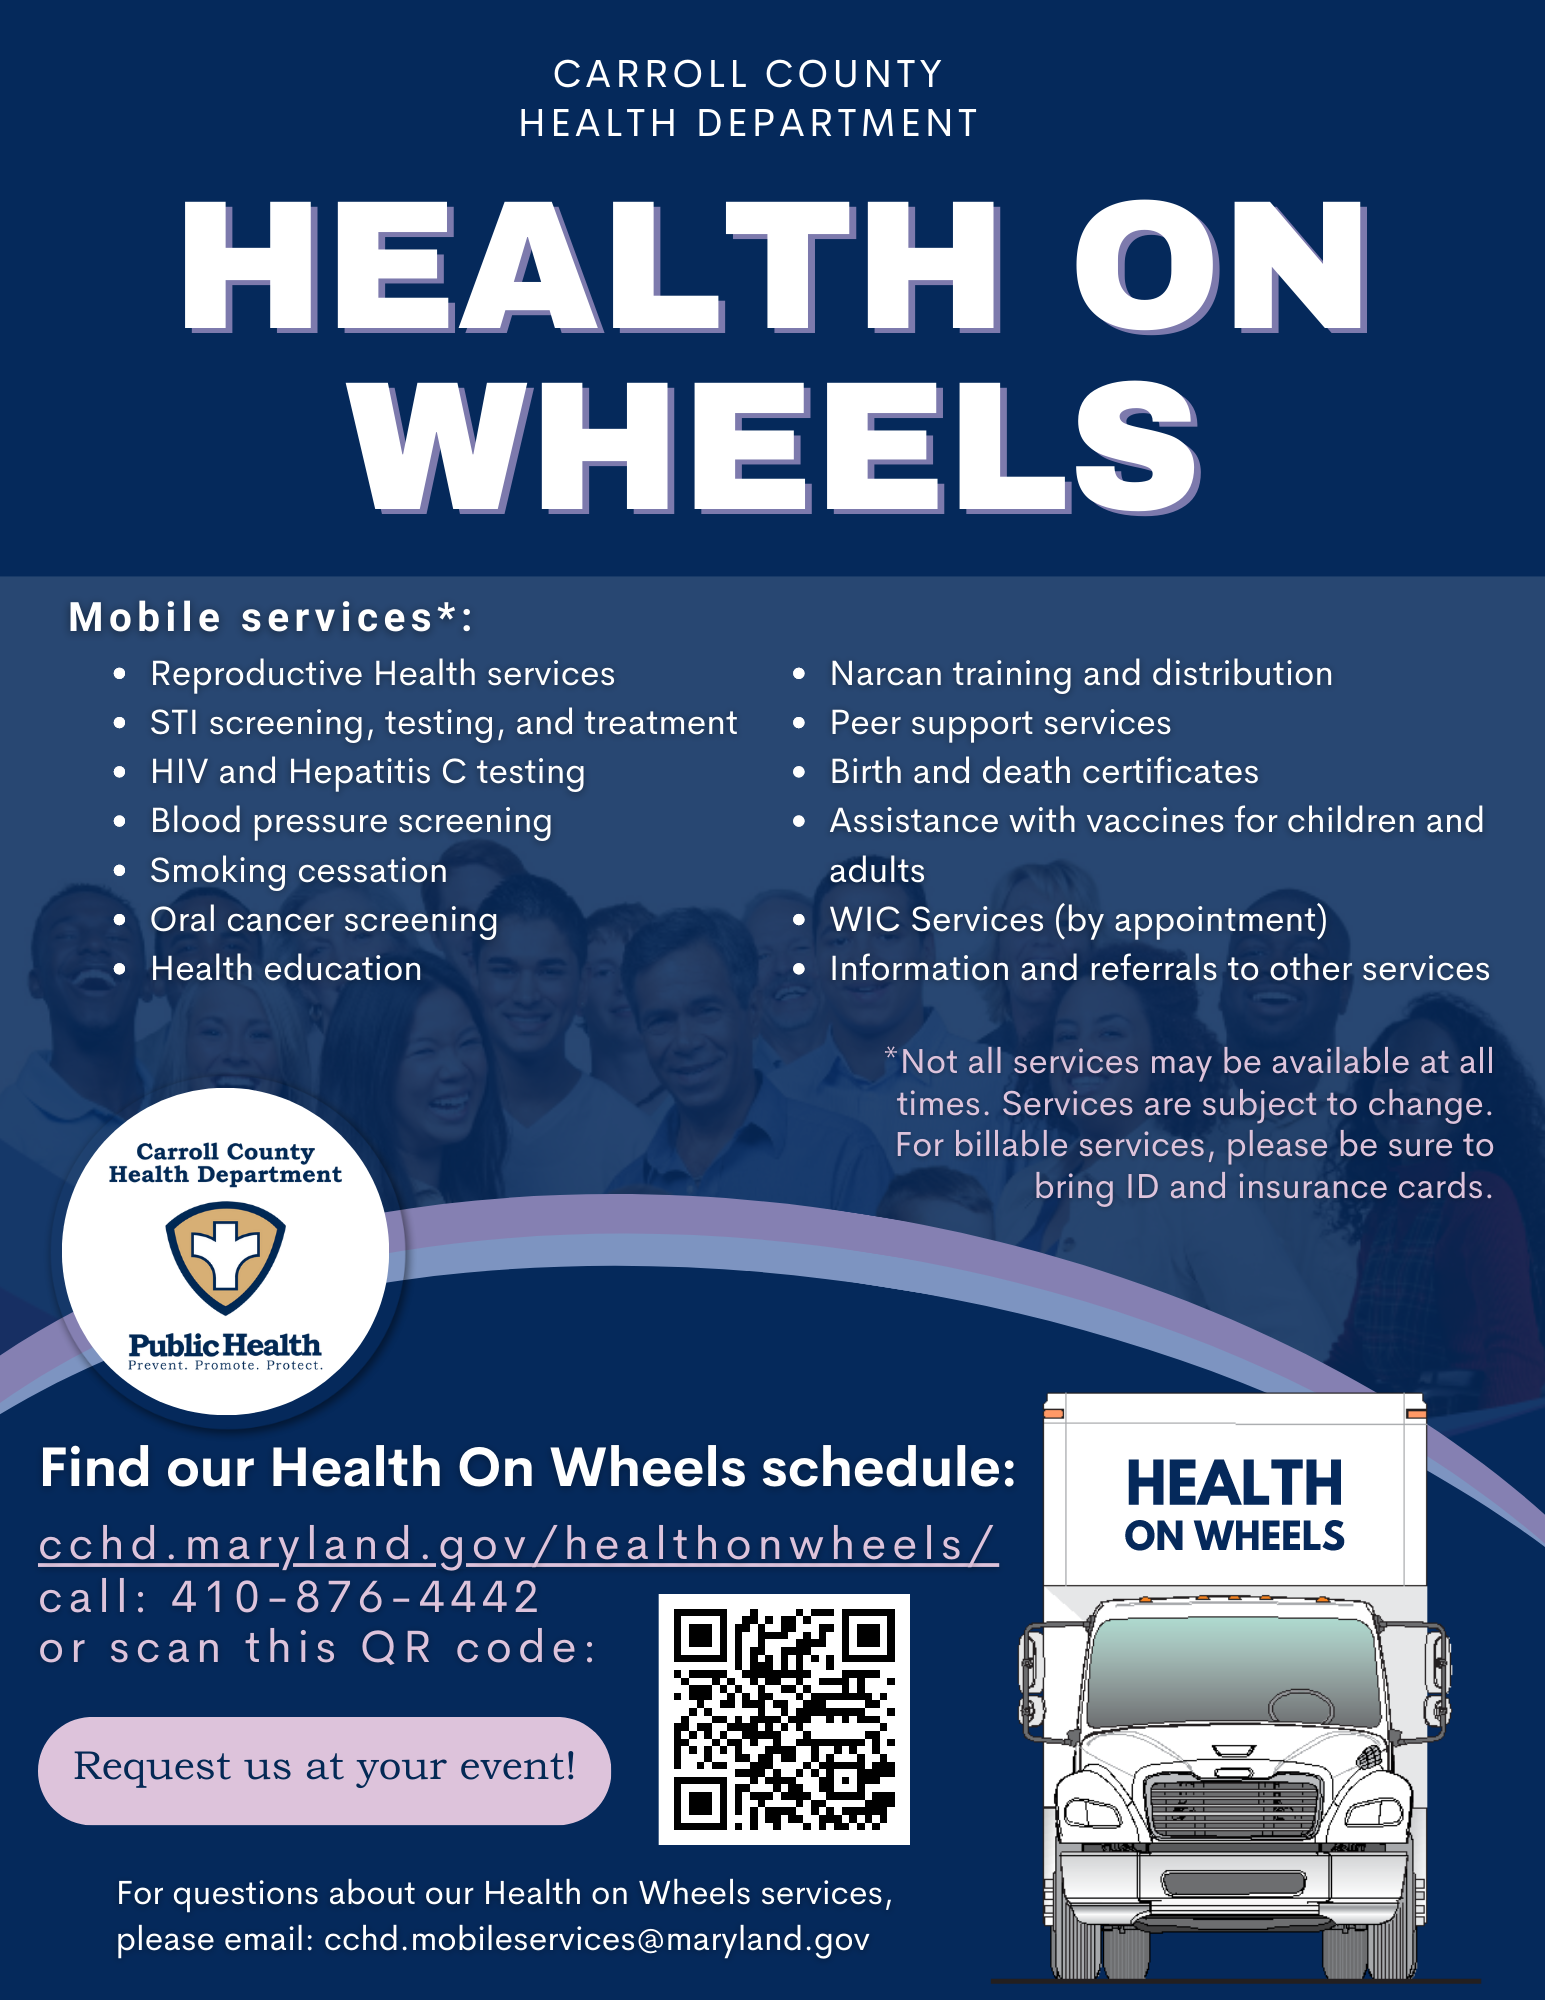 Health on Wheels Mobile Services will include Reproductive Health services
STI screening, testing, and treatment
HIV and Hepatitis C testing
Blood pressure screening
Smoking cessation 
Oral cancer screening 
Health education Narcan training and distribution
Peer support services 
Birth and death certificates 
Assistance with vaccines for children and adults
WIC Services (by appointment)
Information and referrals to other services
Not all services will be available at all times. Please bring your insurance card and ID if possible.